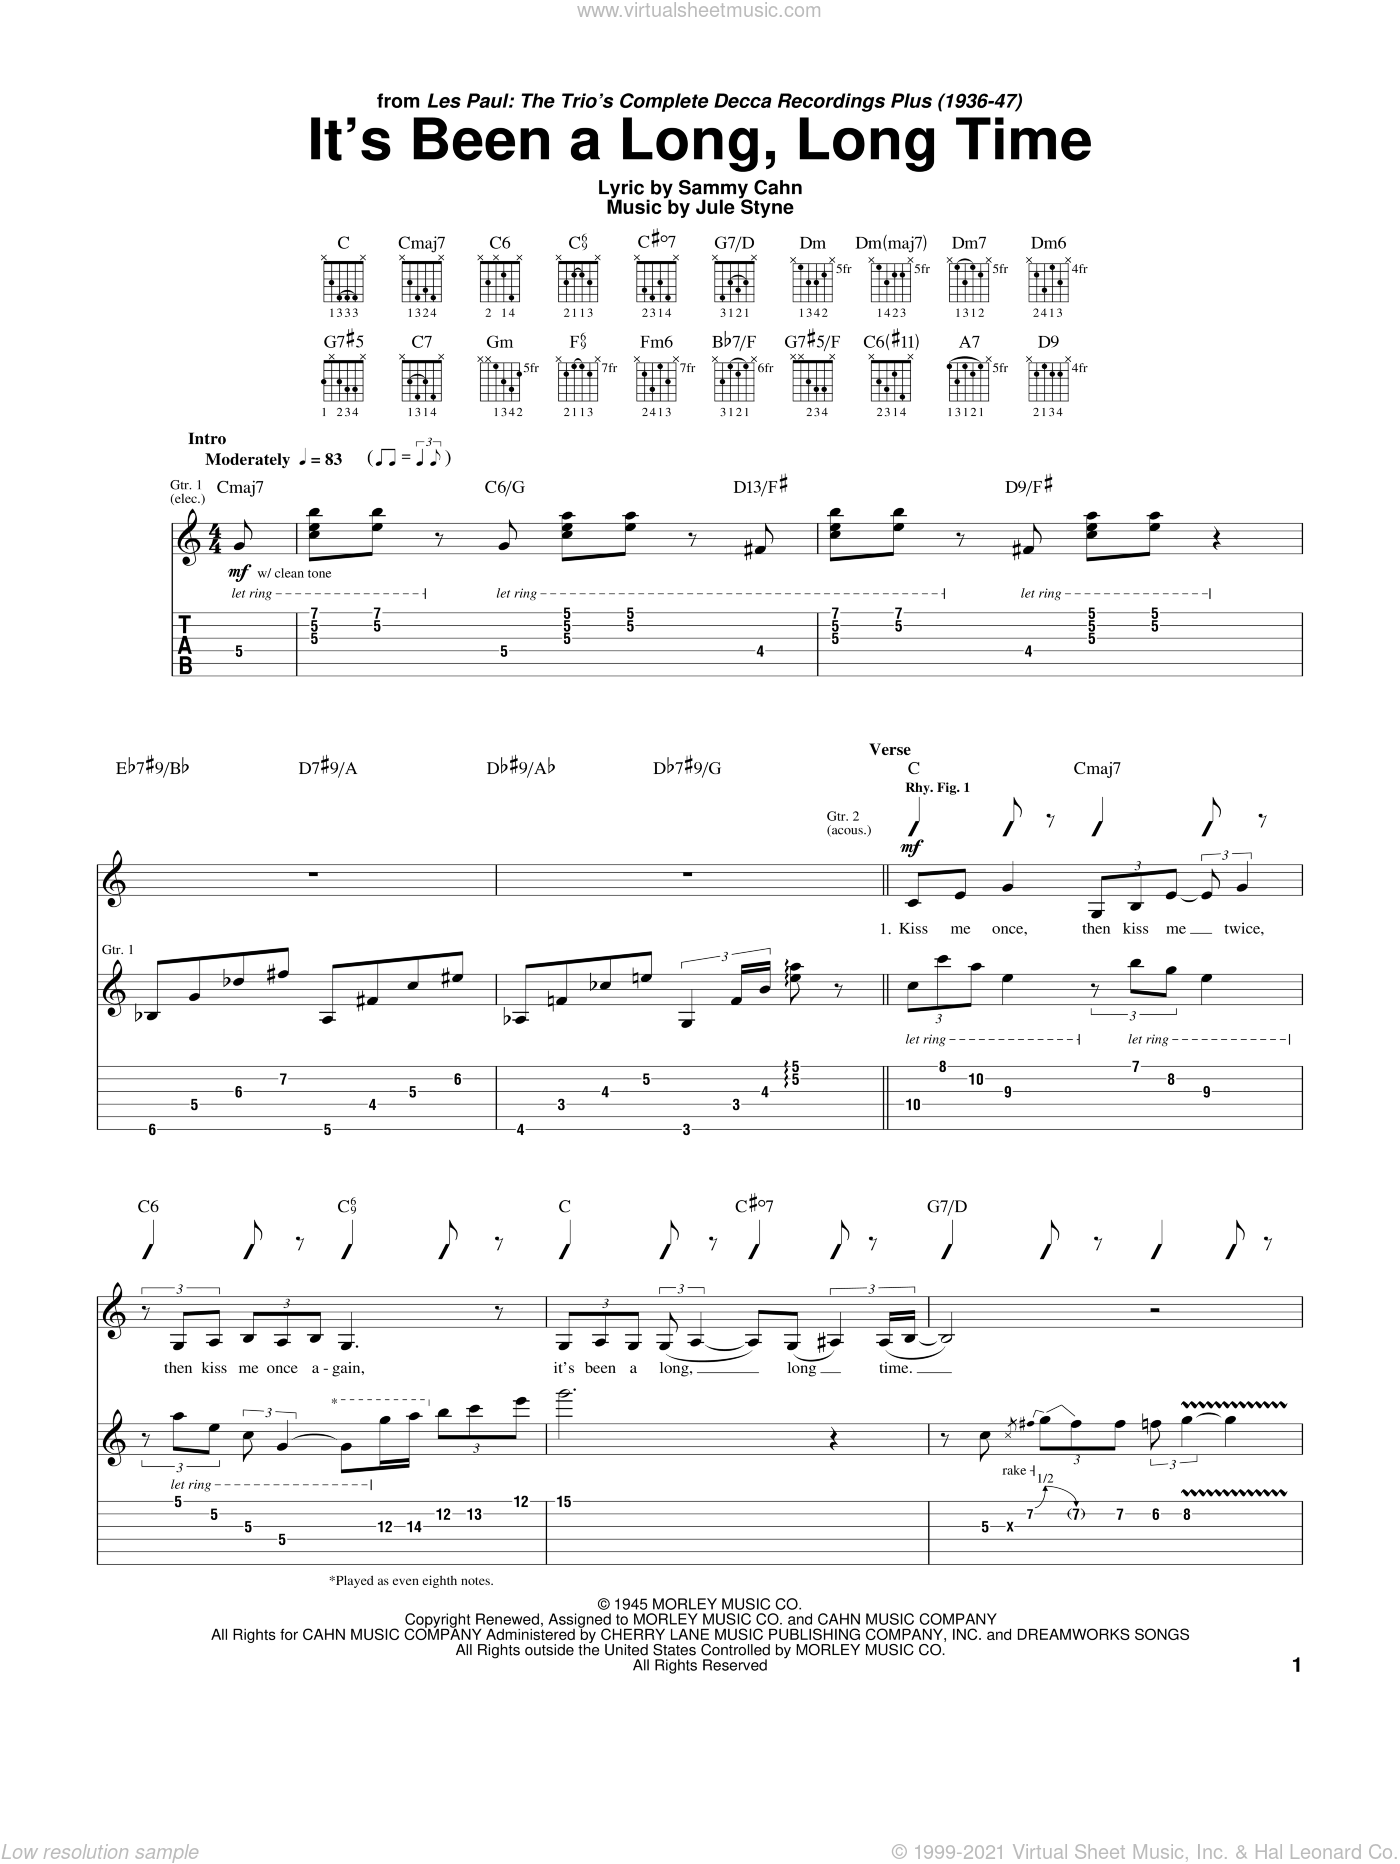 https://cdn3.virtualsheetmusic.com/images/first_pages/HL/HL-7643First_BIG.png